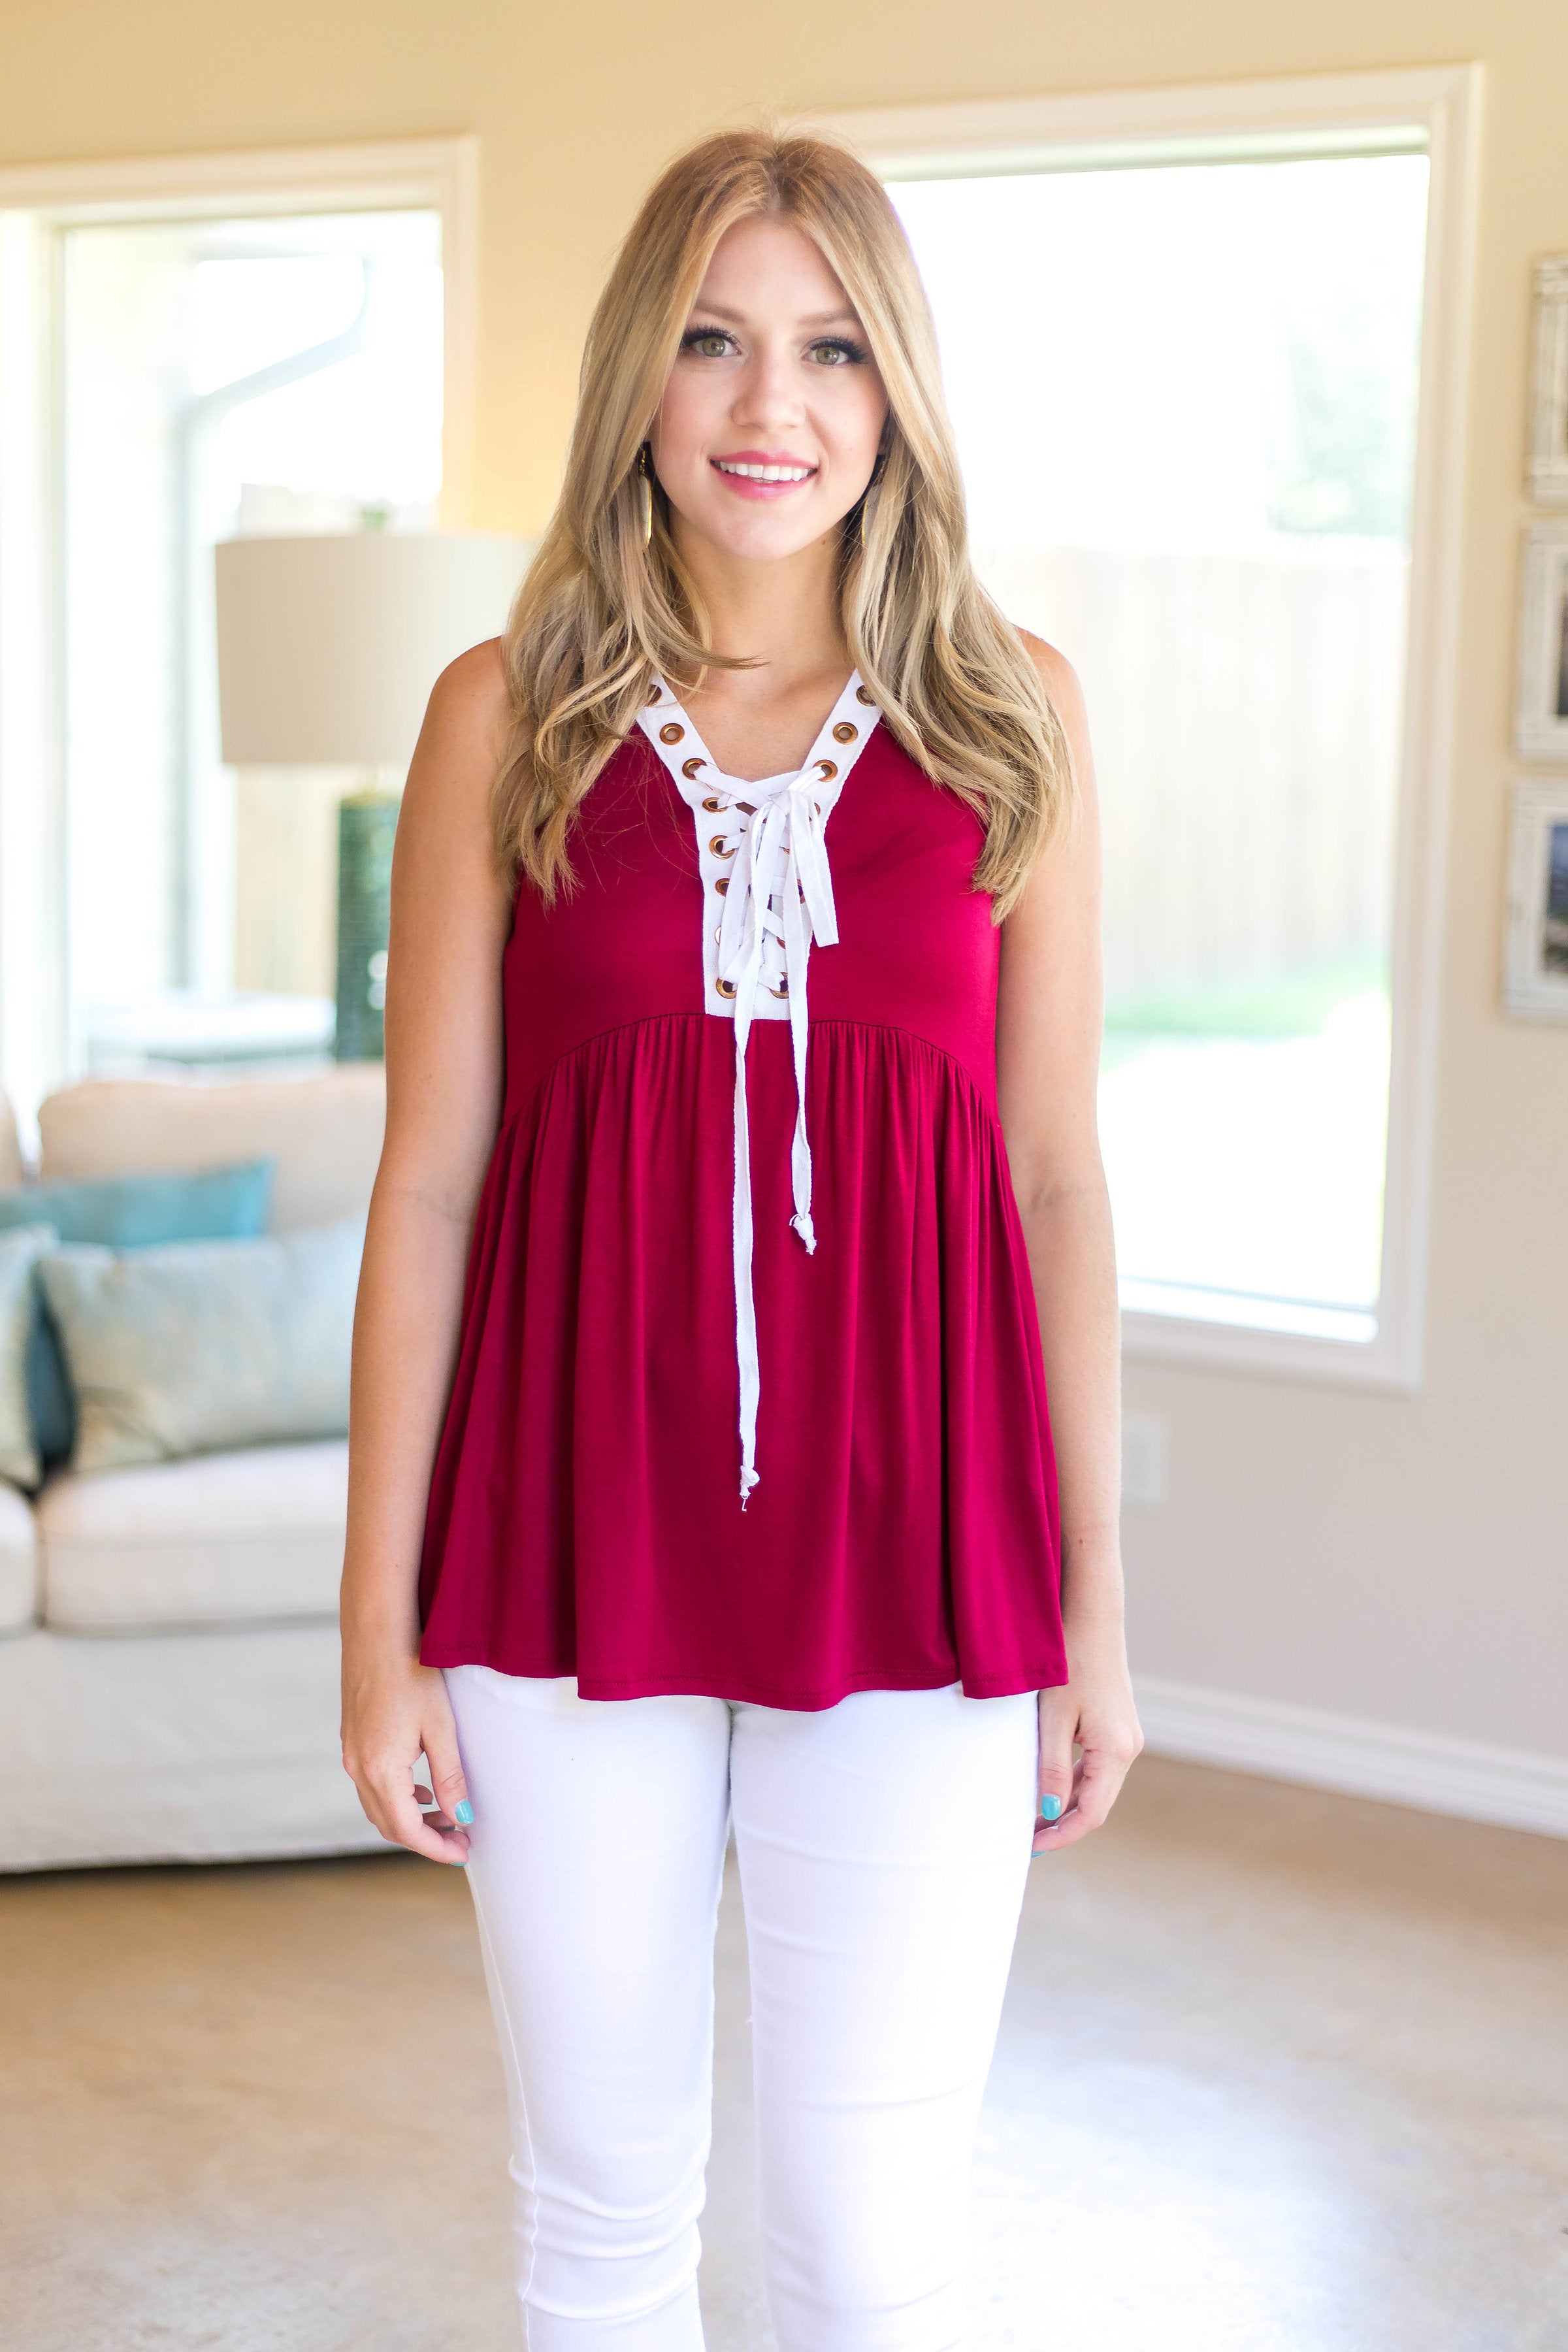 Last Chance Size Small | Standout Style Lace Up Tank Top in Maroon - Giddy Up Glamour Boutique